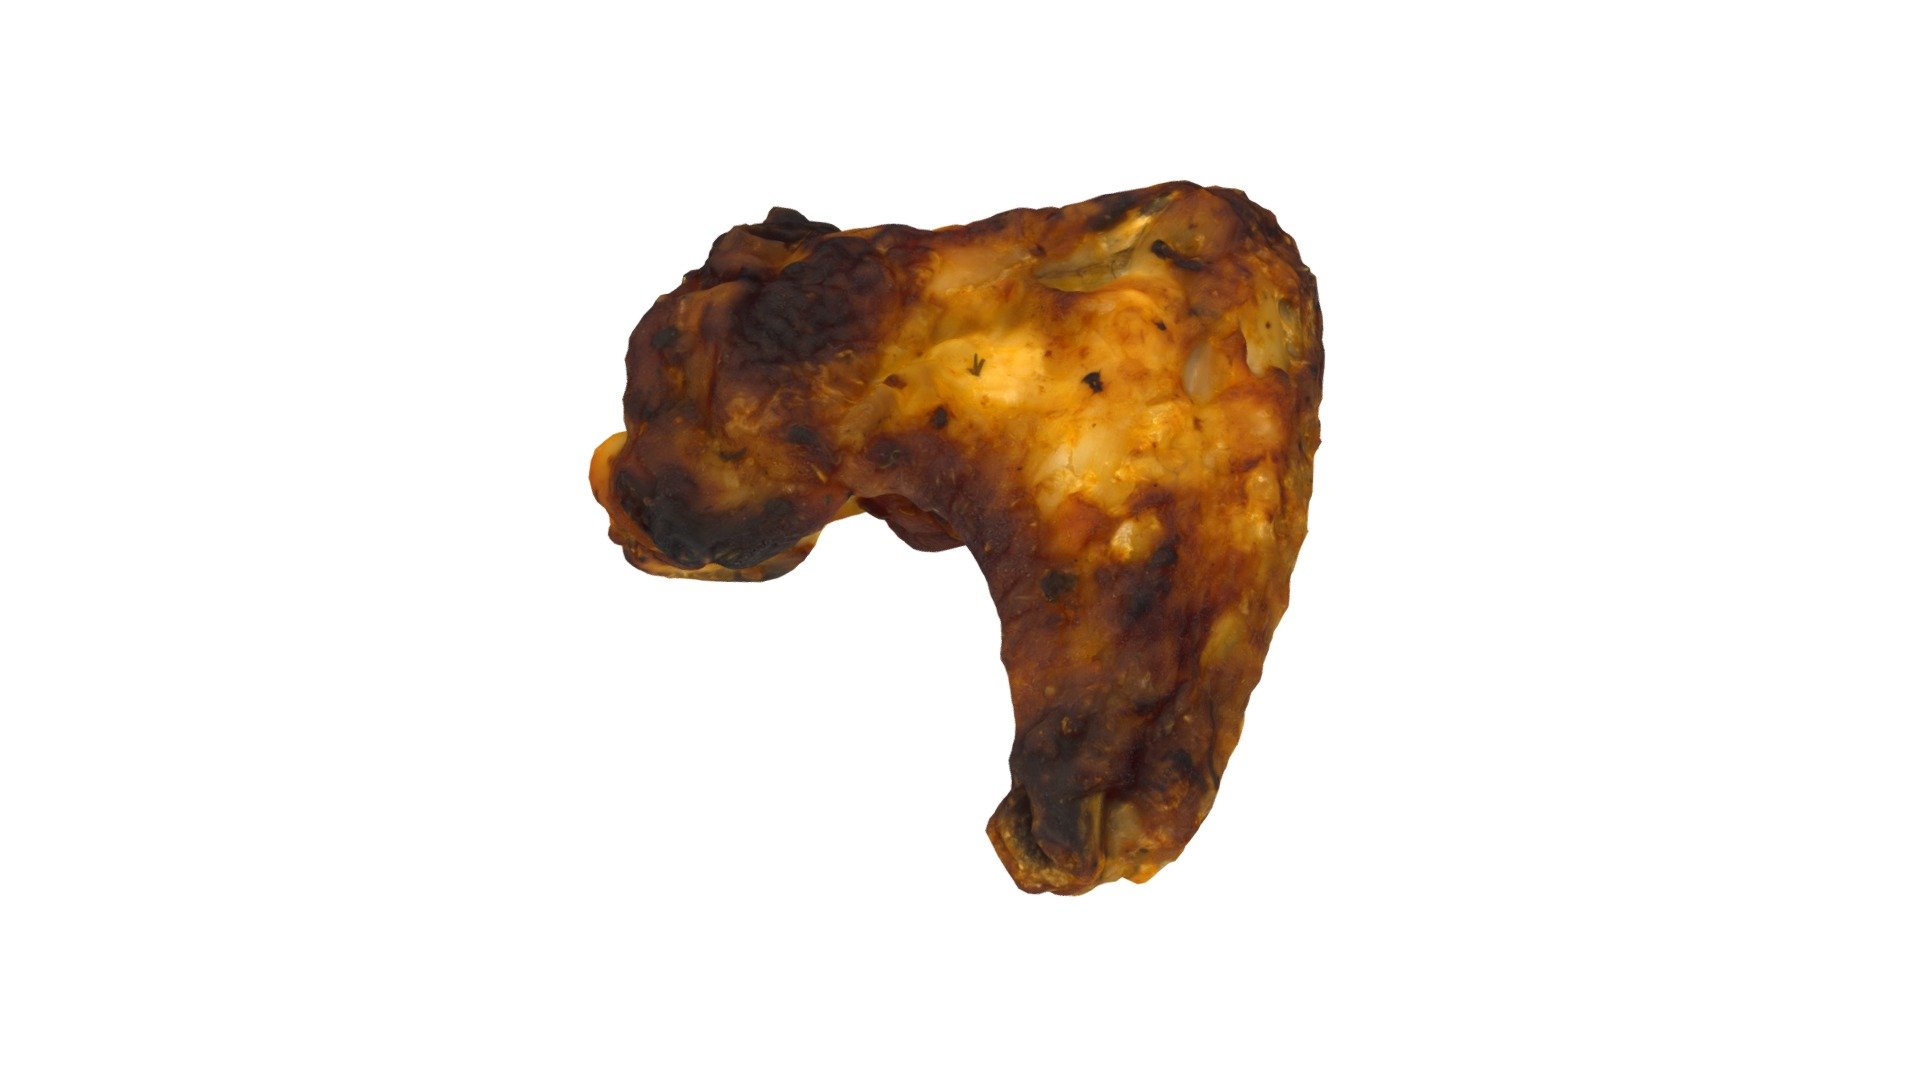 Highly detailed, photorealistic, 3d scanned model of a grilled chicken wing. 8k textures maps, optimized topology and uv unwrapped.

Model shown here is lowpoly with diffuse map only and 4k texture size.

This model is available at www.thecreativecrops.com 3d model